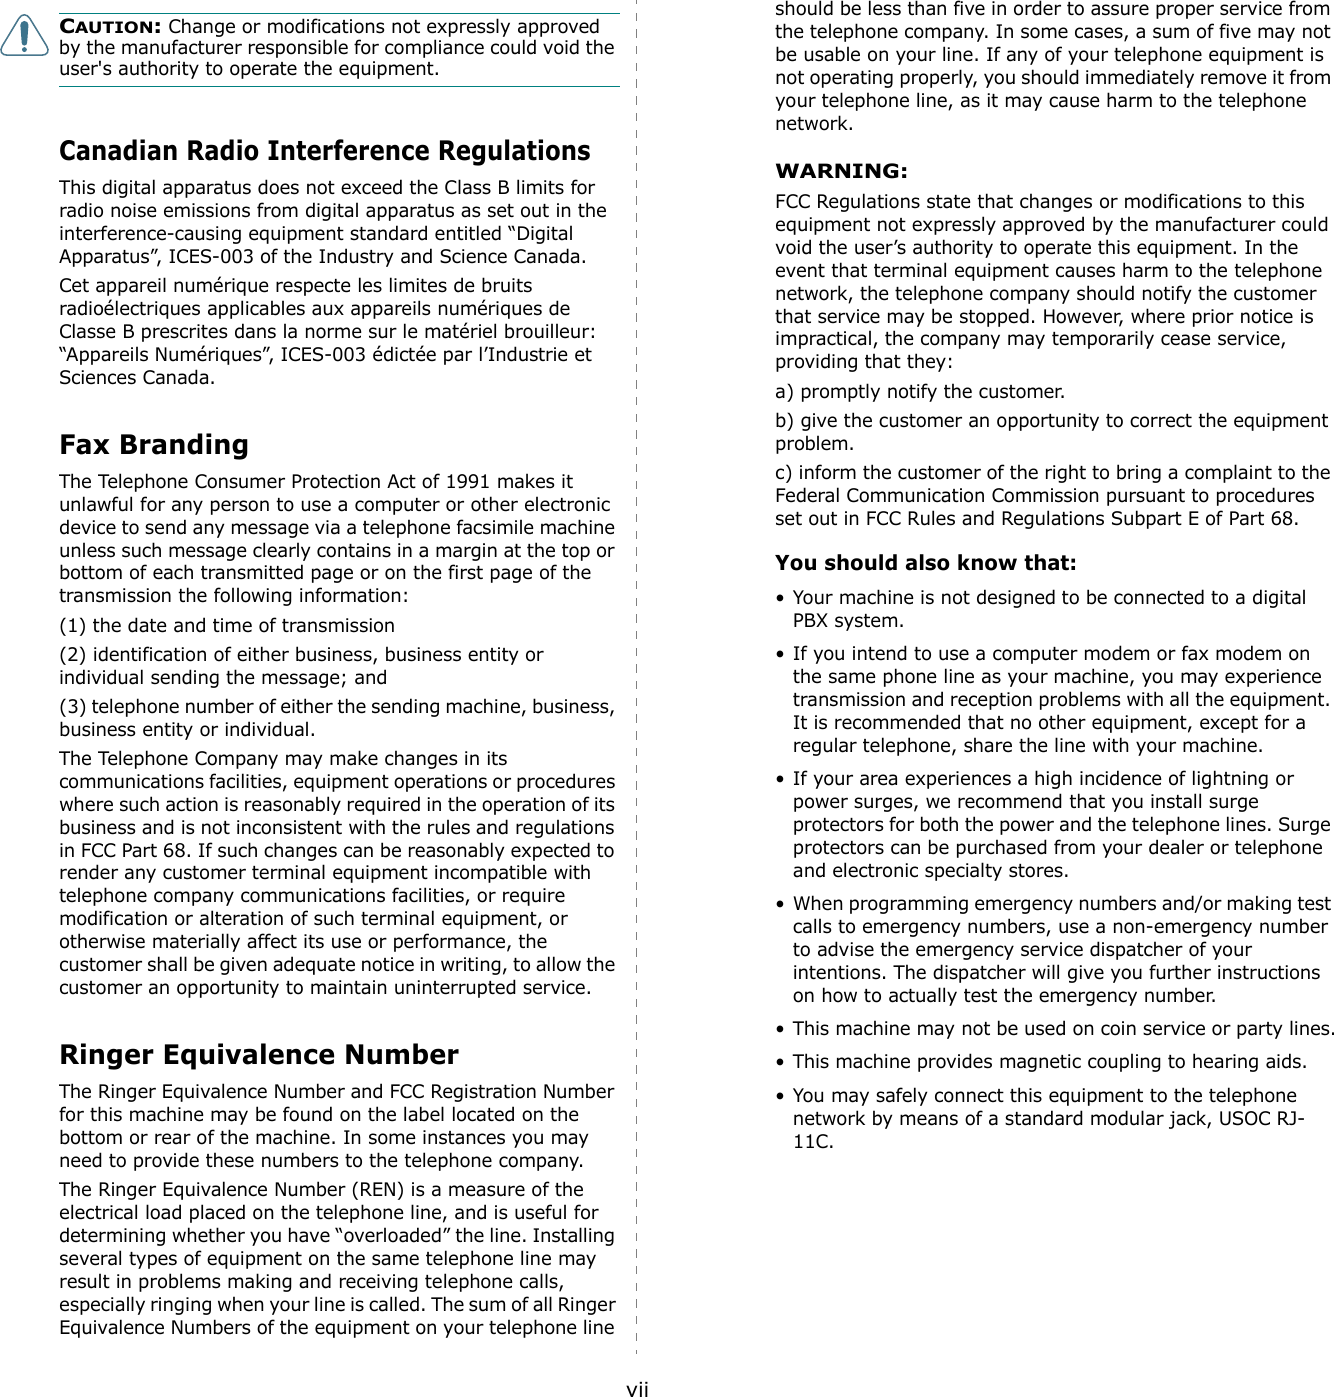 viiCAUTION: Change or modifications not expressly approved by the manufacturer responsible for compliance could void the user&apos;s authority to operate the equipment.Canadian Radio Interference RegulationsThis digital apparatus does not exceed the Class B limits for radio noise emissions from digital apparatus as set out in the interference-causing equipment standard entitled “Digital Apparatus”, ICES-003 of the Industry and Science Canada.Cet appareil numérique respecte les limites de bruits radioélectriques applicables aux appareils numériques de Classe B prescrites dans la norme sur le matériel brouilleur: “Appareils Numériques”, ICES-003 édictée par l’Industrie et Sciences Canada.Fax BrandingThe Telephone Consumer Protection Act of 1991 makes it unlawful for any person to use a computer or other electronic device to send any message via a telephone facsimile machine unless such message clearly contains in a margin at the top or bottom of each transmitted page or on the first page of the transmission the following information:(1) the date and time of transmission(2) identification of either business, business entity or individual sending the message; and(3) telephone number of either the sending machine, business, business entity or individual.The Telephone Company may make changes in its communications facilities, equipment operations or procedures where such action is reasonably required in the operation of its business and is not inconsistent with the rules and regulations in FCC Part 68. If such changes can be reasonably expected to render any customer terminal equipment incompatible with telephone company communications facilities, or require modification or alteration of such terminal equipment, or otherwise materially affect its use or performance, the customer shall be given adequate notice in writing, to allow the customer an opportunity to maintain uninterrupted service.Ringer Equivalence NumberThe Ringer Equivalence Number and FCC Registration Number for this machine may be found on the label located on the bottom or rear of the machine. In some instances you may need to provide these numbers to the telephone company.The Ringer Equivalence Number (REN) is a measure of the electrical load placed on the telephone line, and is useful for determining whether you have “overloaded” the line. Installing several types of equipment on the same telephone line may result in problems making and receiving telephone calls, especially ringing when your line is called. The sum of all Ringer Equivalence Numbers of the equipment on your telephone line should be less than five in order to assure proper service from the telephone company. In some cases, a sum of five may not be usable on your line. If any of your telephone equipment is not operating properly, you should immediately remove it from your telephone line, as it may cause harm to the telephone network.WARNING:FCC Regulations state that changes or modifications to this equipment not expressly approved by the manufacturer could void the user’s authority to operate this equipment. In the event that terminal equipment causes harm to the telephone network, the telephone company should notify the customer that service may be stopped. However, where prior notice is impractical, the company may temporarily cease service, providing that they:a) promptly notify the customer.b) give the customer an opportunity to correct the equipment problem.c) inform the customer of the right to bring a complaint to the Federal Communication Commission pursuant to procedures set out in FCC Rules and Regulations Subpart E of Part 68.You should also know that:• Your machine is not designed to be connected to a digital PBX system.• If you intend to use a computer modem or fax modem on the same phone line as your machine, you may experience transmission and reception problems with all the equipment. It is recommended that no other equipment, except for a regular telephone, share the line with your machine.• If your area experiences a high incidence of lightning or power surges, we recommend that you install surge protectors for both the power and the telephone lines. Surge protectors can be purchased from your dealer or telephone and electronic specialty stores.• When programming emergency numbers and/or making test calls to emergency numbers, use a non-emergency number to advise the emergency service dispatcher of your intentions. The dispatcher will give you further instructions on how to actually test the emergency number.• This machine may not be used on coin service or party lines.• This machine provides magnetic coupling to hearing aids.• You may safely connect this equipment to the telephone network by means of a standard modular jack, USOC RJ-11C.